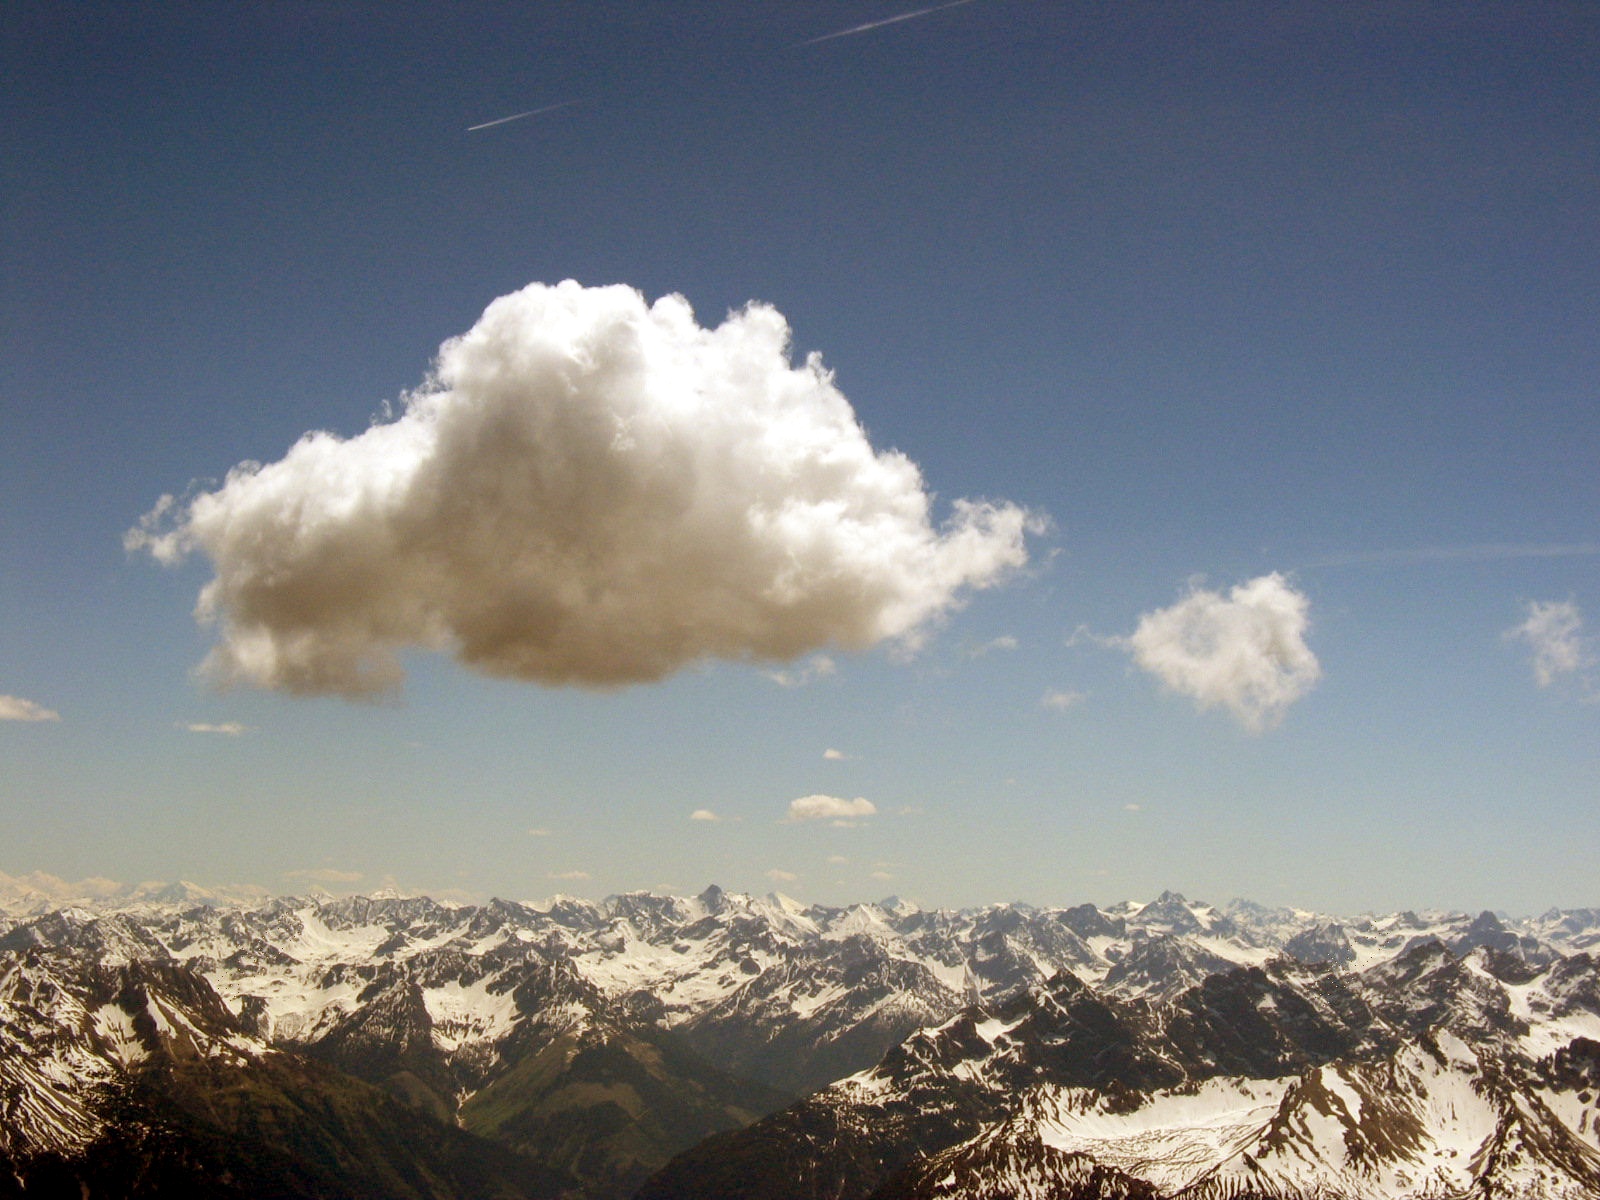 Example of Cumulus cloud: inspiration on the left, plot example on the right (nobound10lex-ppmiweight-focall of dof). Picture by Glg, edited by User:drini - photo taken by Glg, CC BY-SA 2.0 de, https://commons.wikimedia.org/w/index.php?curid=3443830.